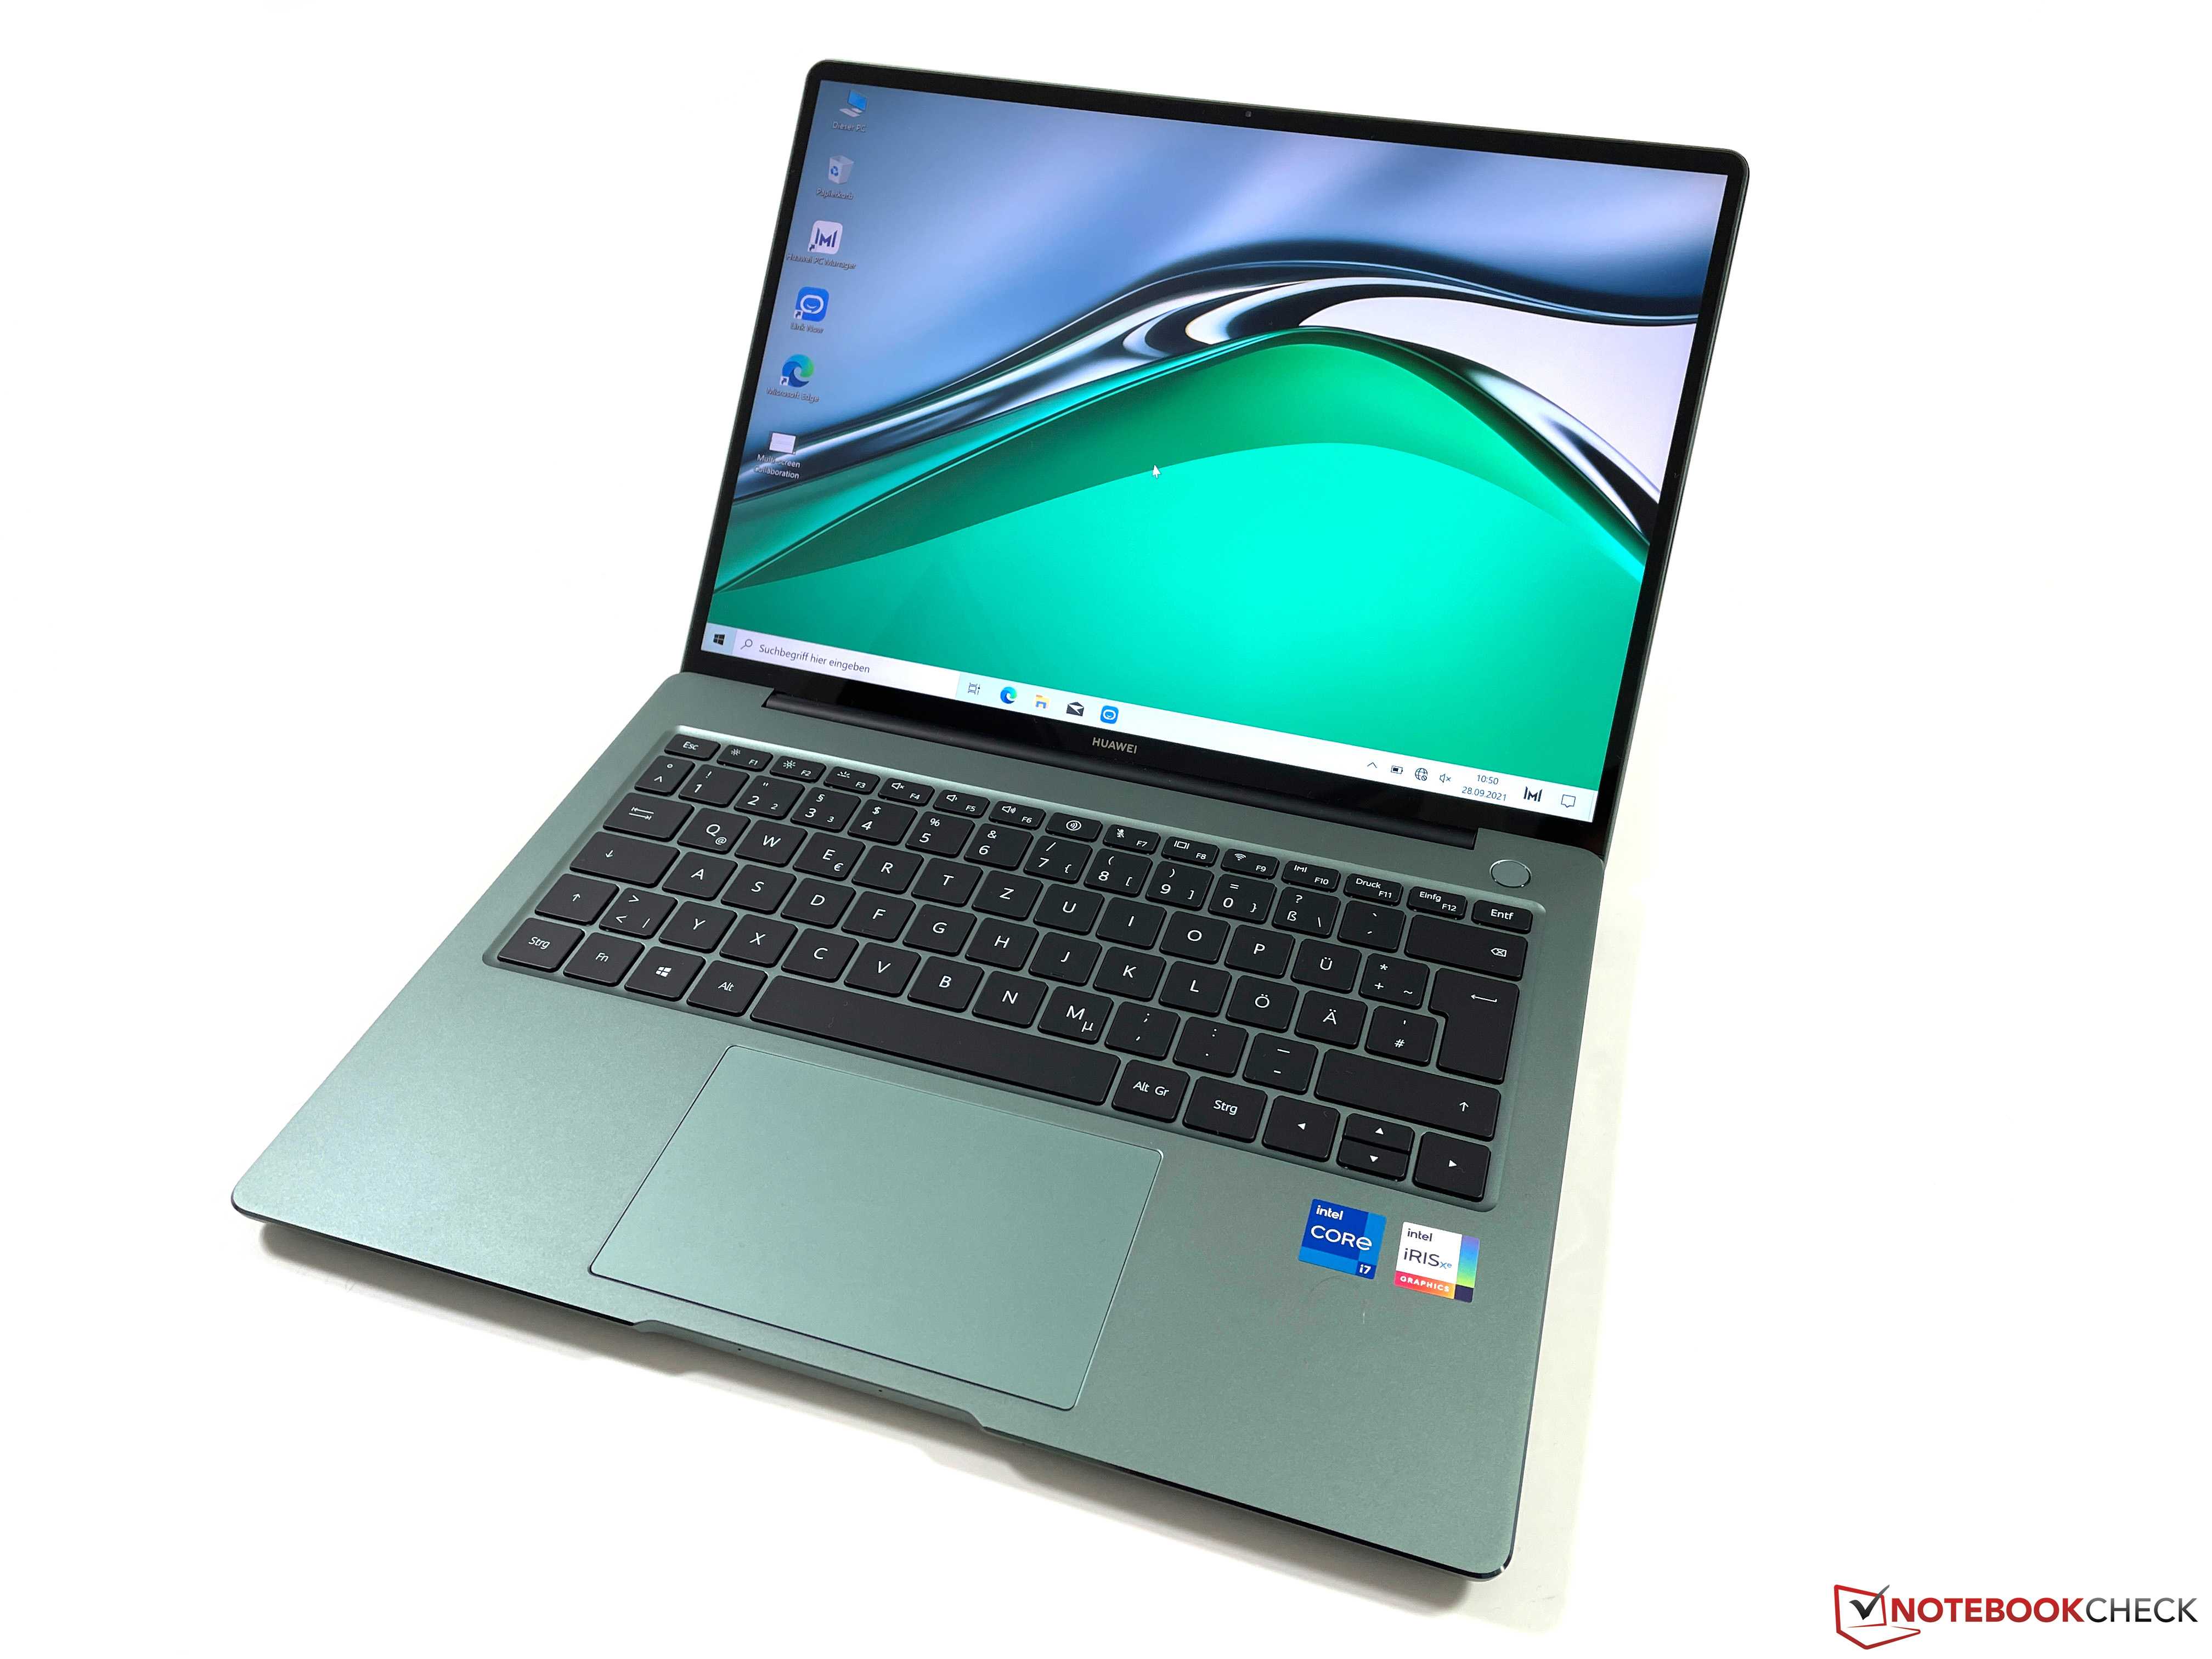 HUAWEI MATEBOOK D14: A POWERFUL LAPTOP FOR THE NEW NORMAL 